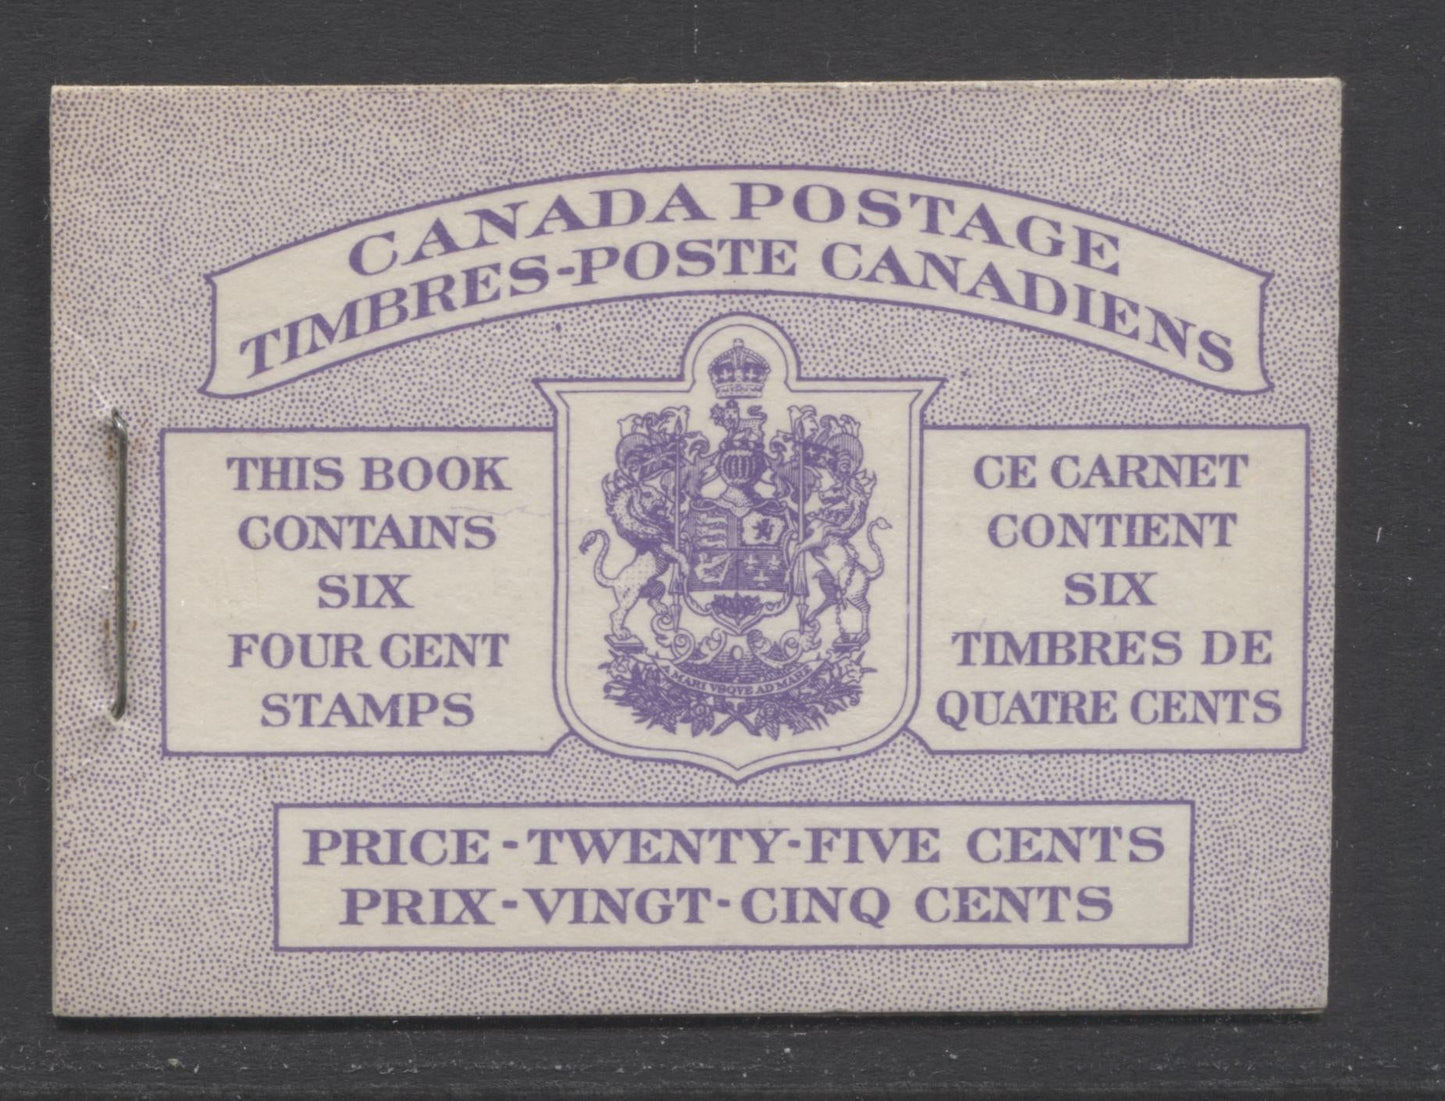 Lot 280 Canada #BK50a 1954-1962 Wilding Issue, Complete 25c Bilingual Booklet, No Rate Page, 16 mm Staple, LF Ribbed Paper, Type 1 Cover, Front Cover IIIh, Back Cover Mi, VF